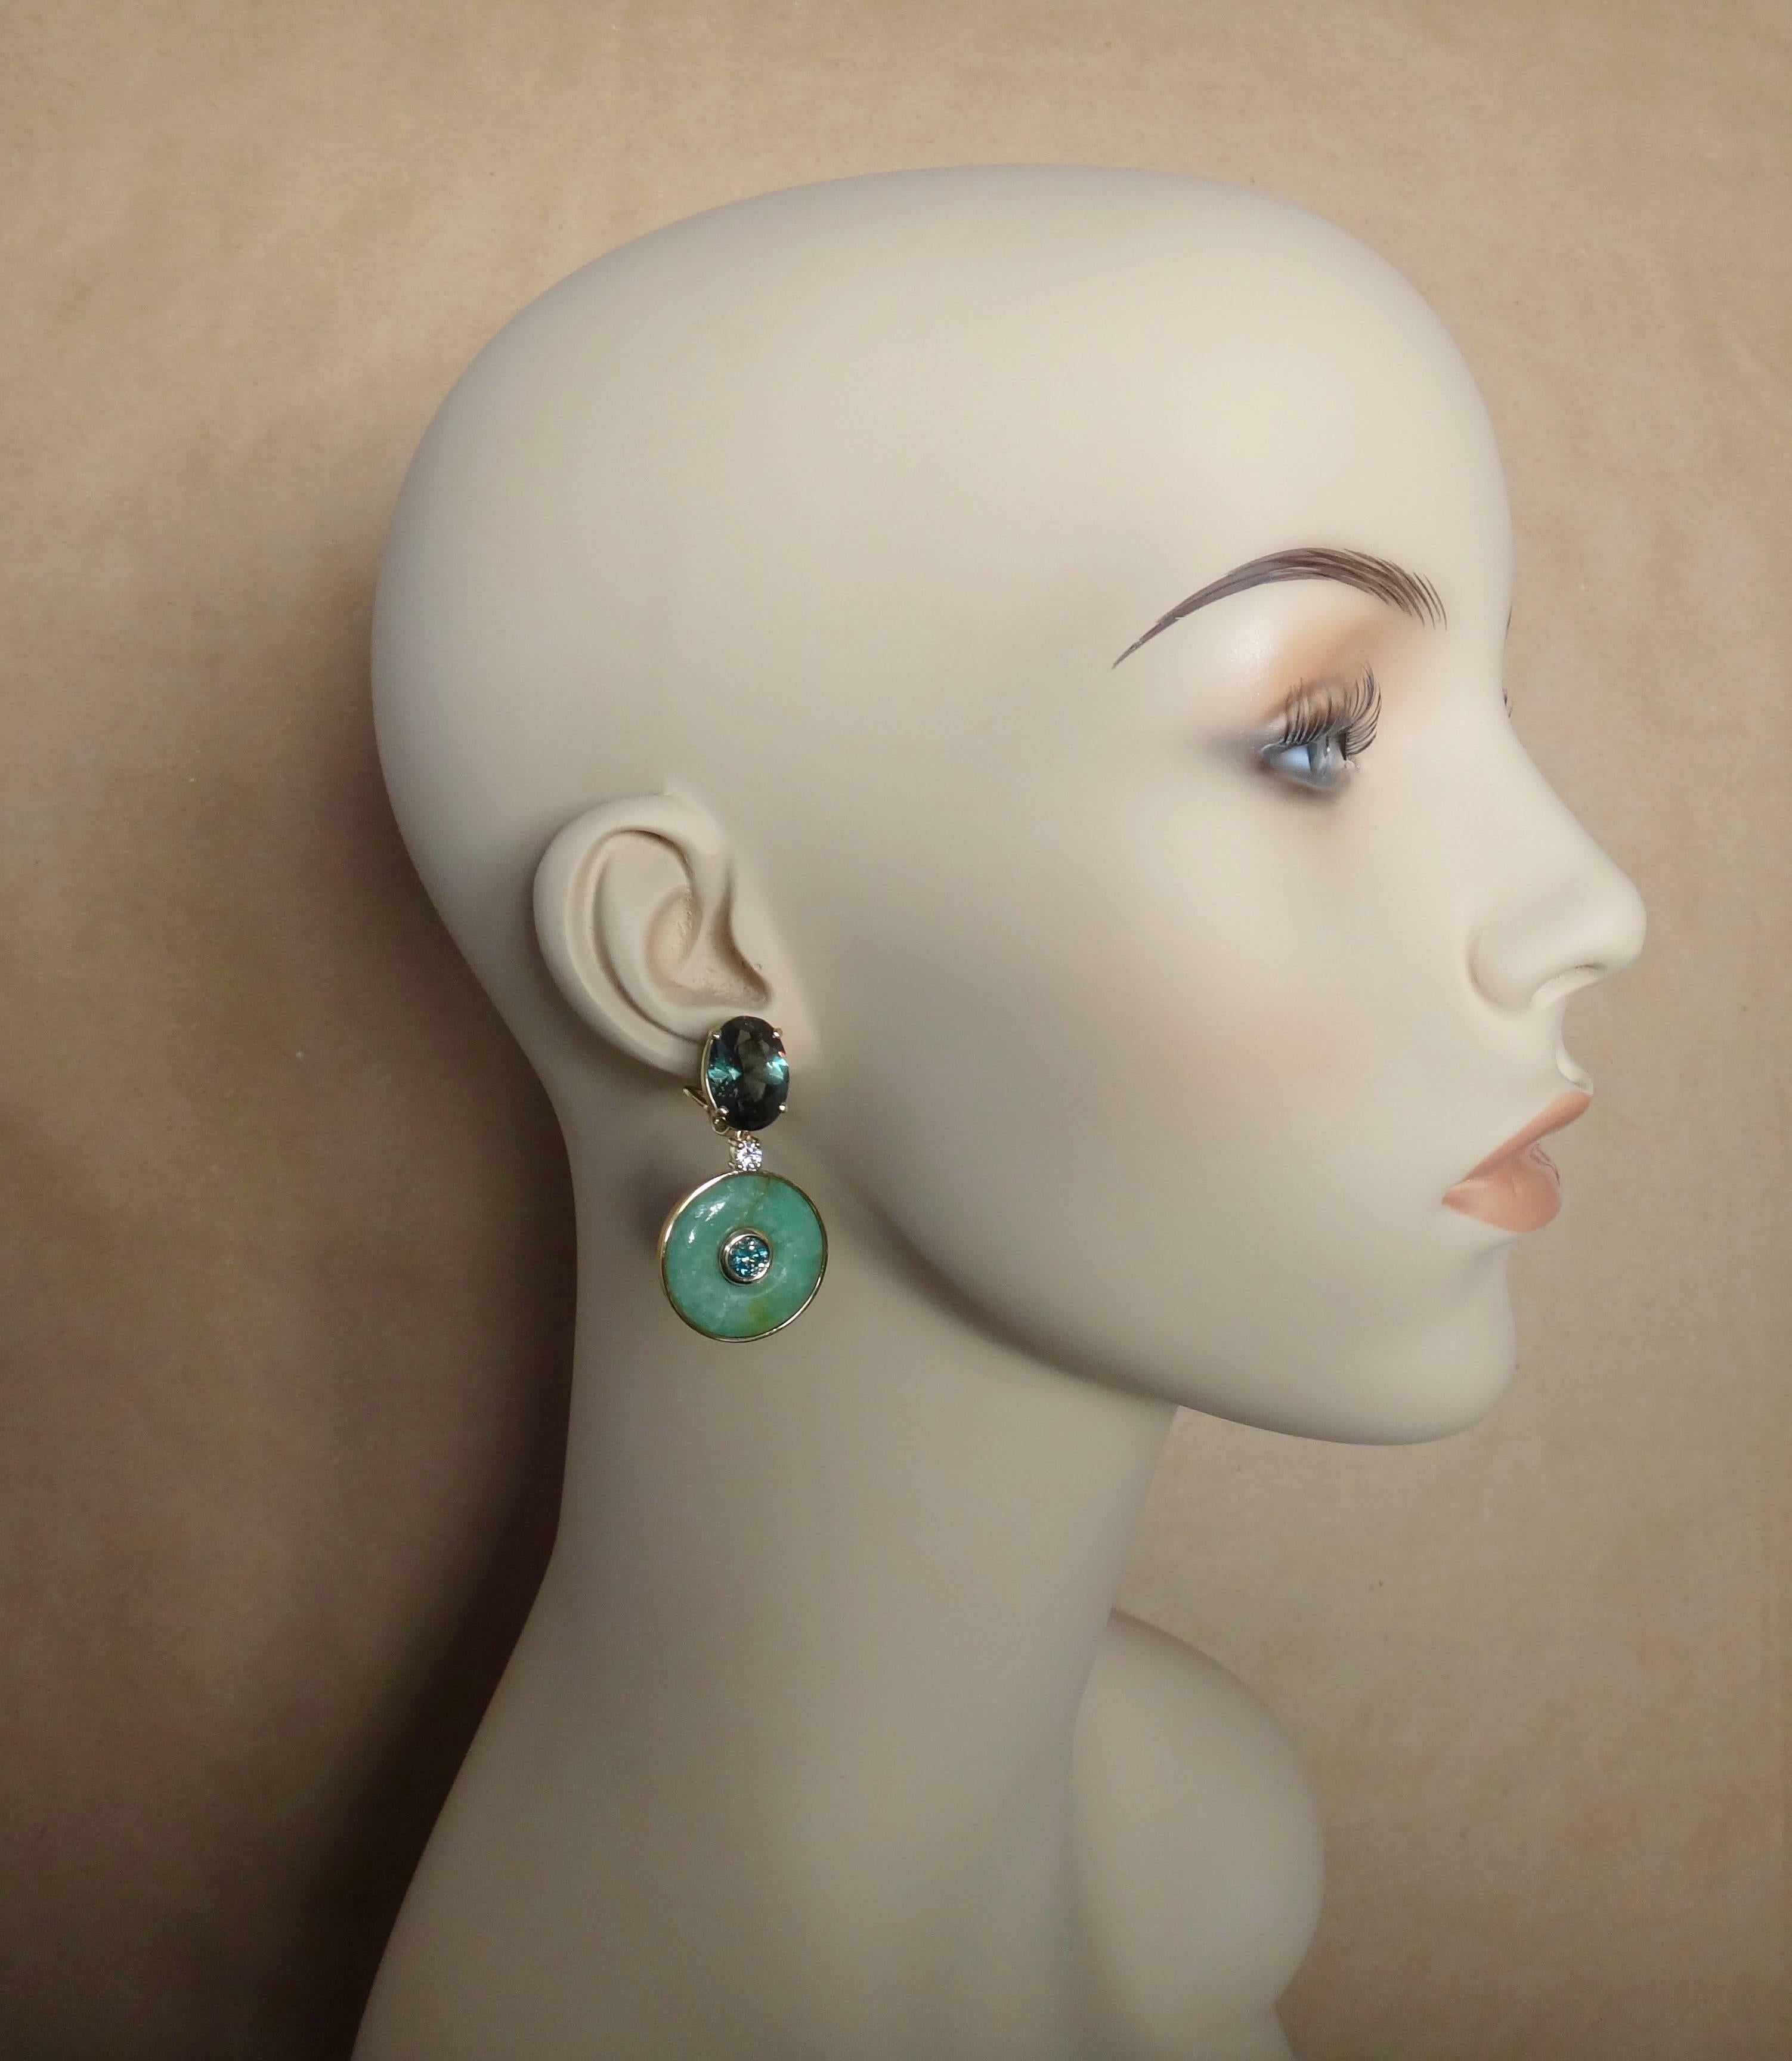 Carved discs of green Burmese jadeite are the hallmark of these dangle earrings.  (In Chinese, jade is known as 